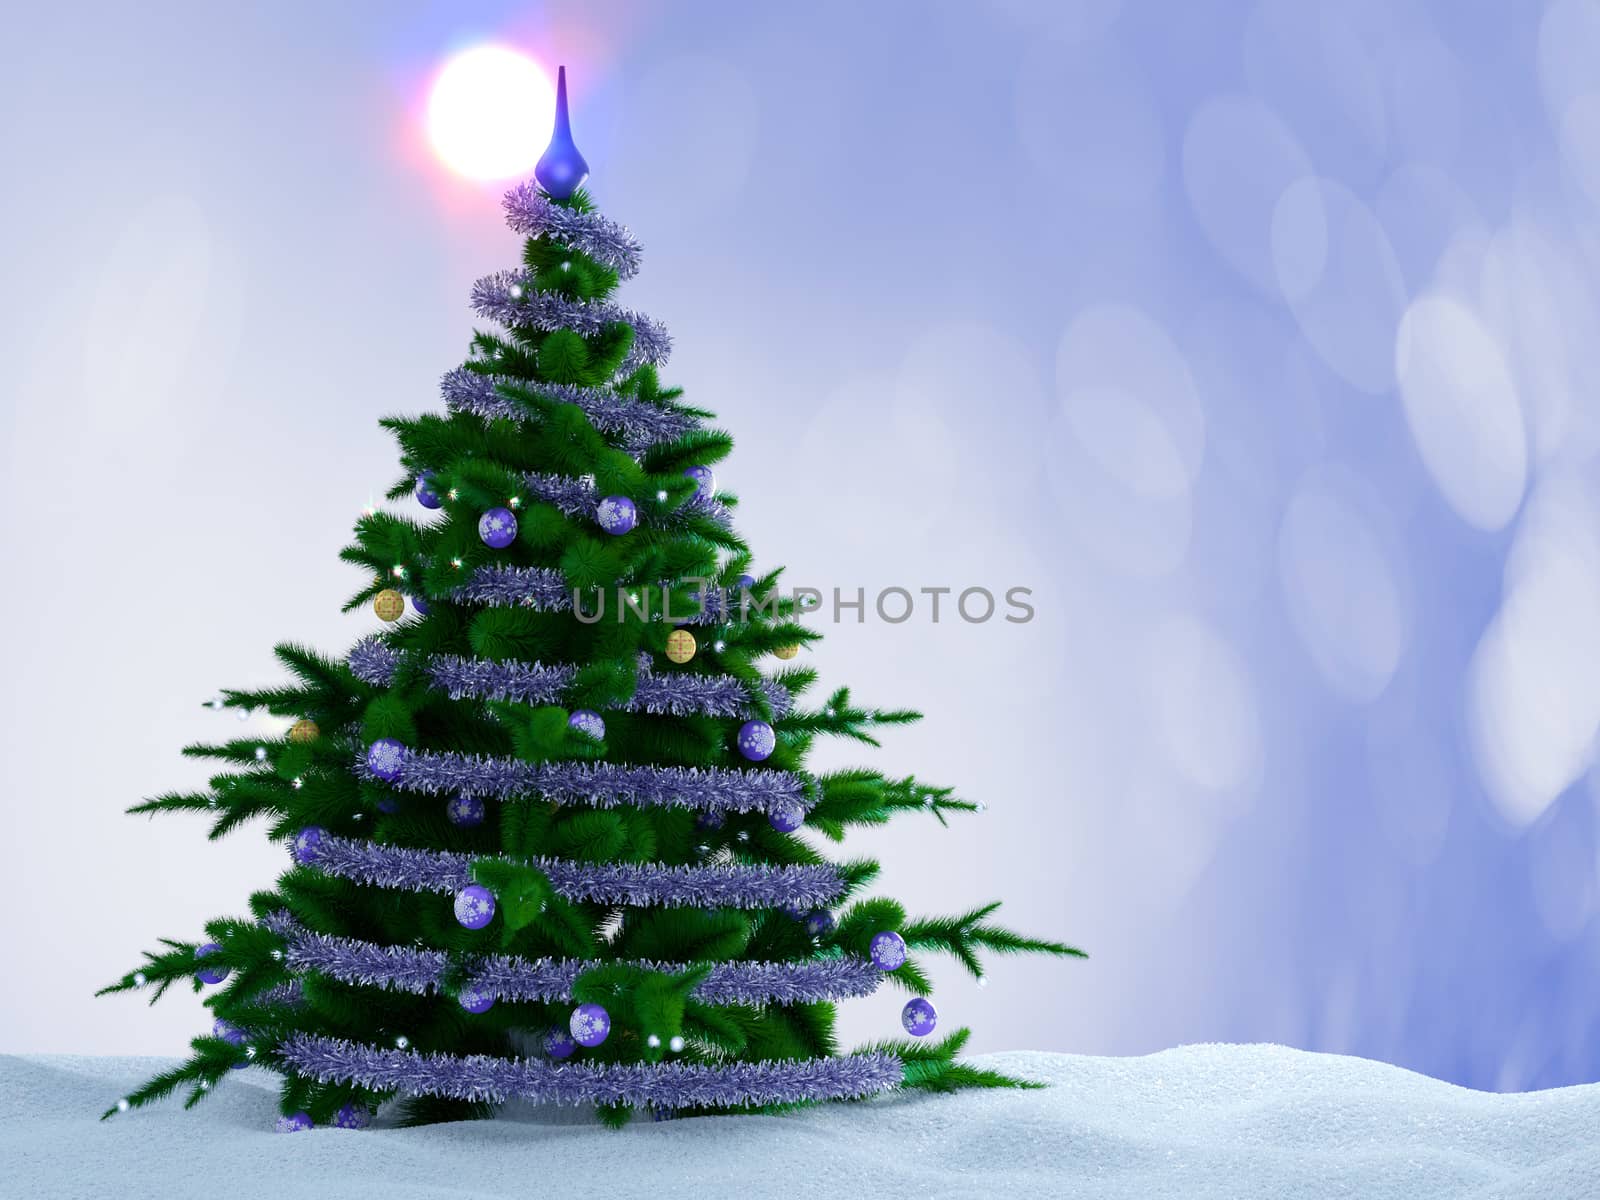 Christmas tree with decorations and snow on decorative background.